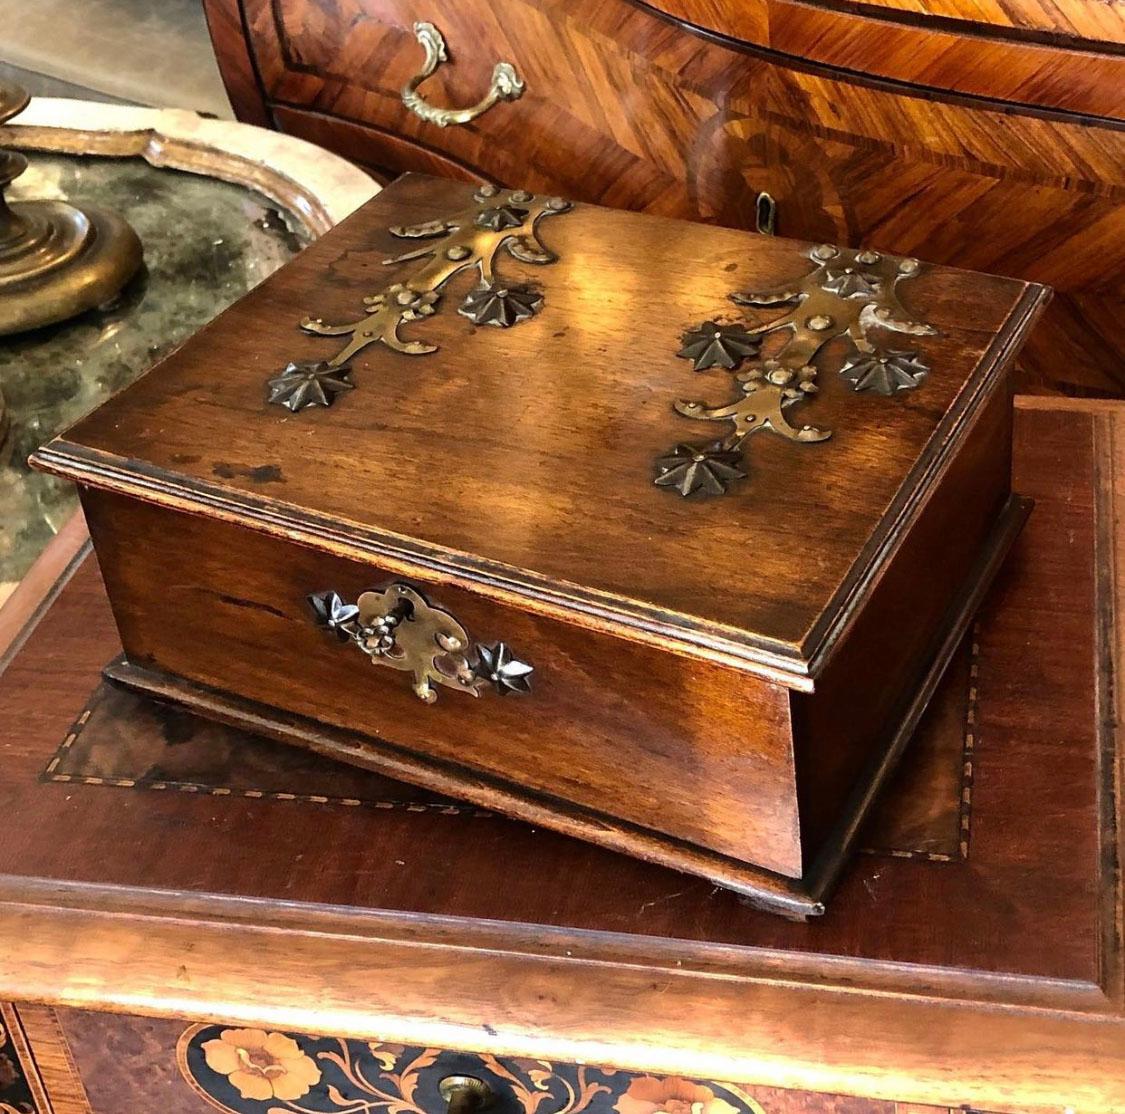 Turn of the century German walnut box with brass decoration on the top of the box and the bottom. Original key.